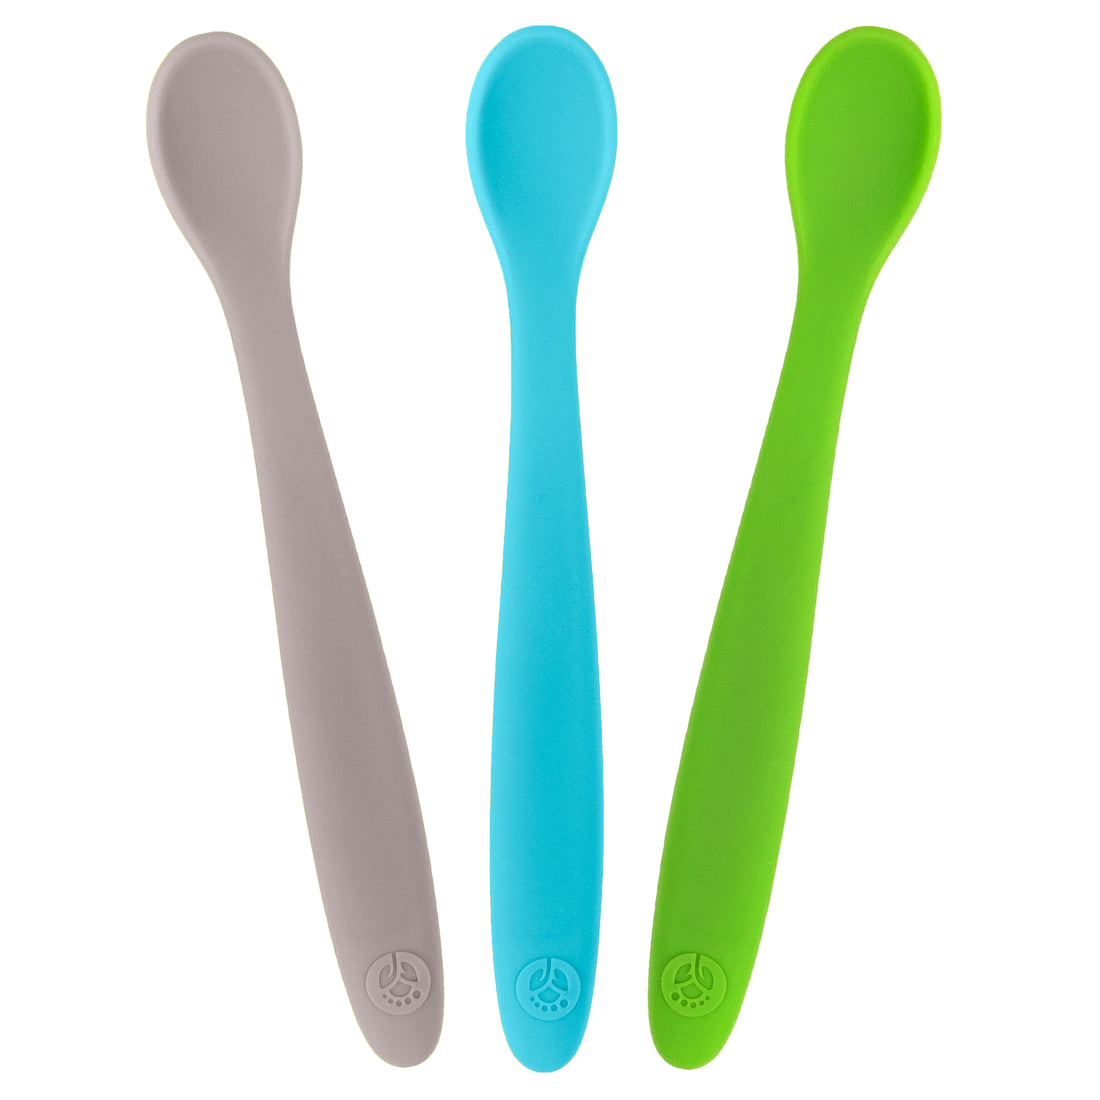 Silicone Baby Spoons For Baby Led Weaning 4-pack, First Stage Baby